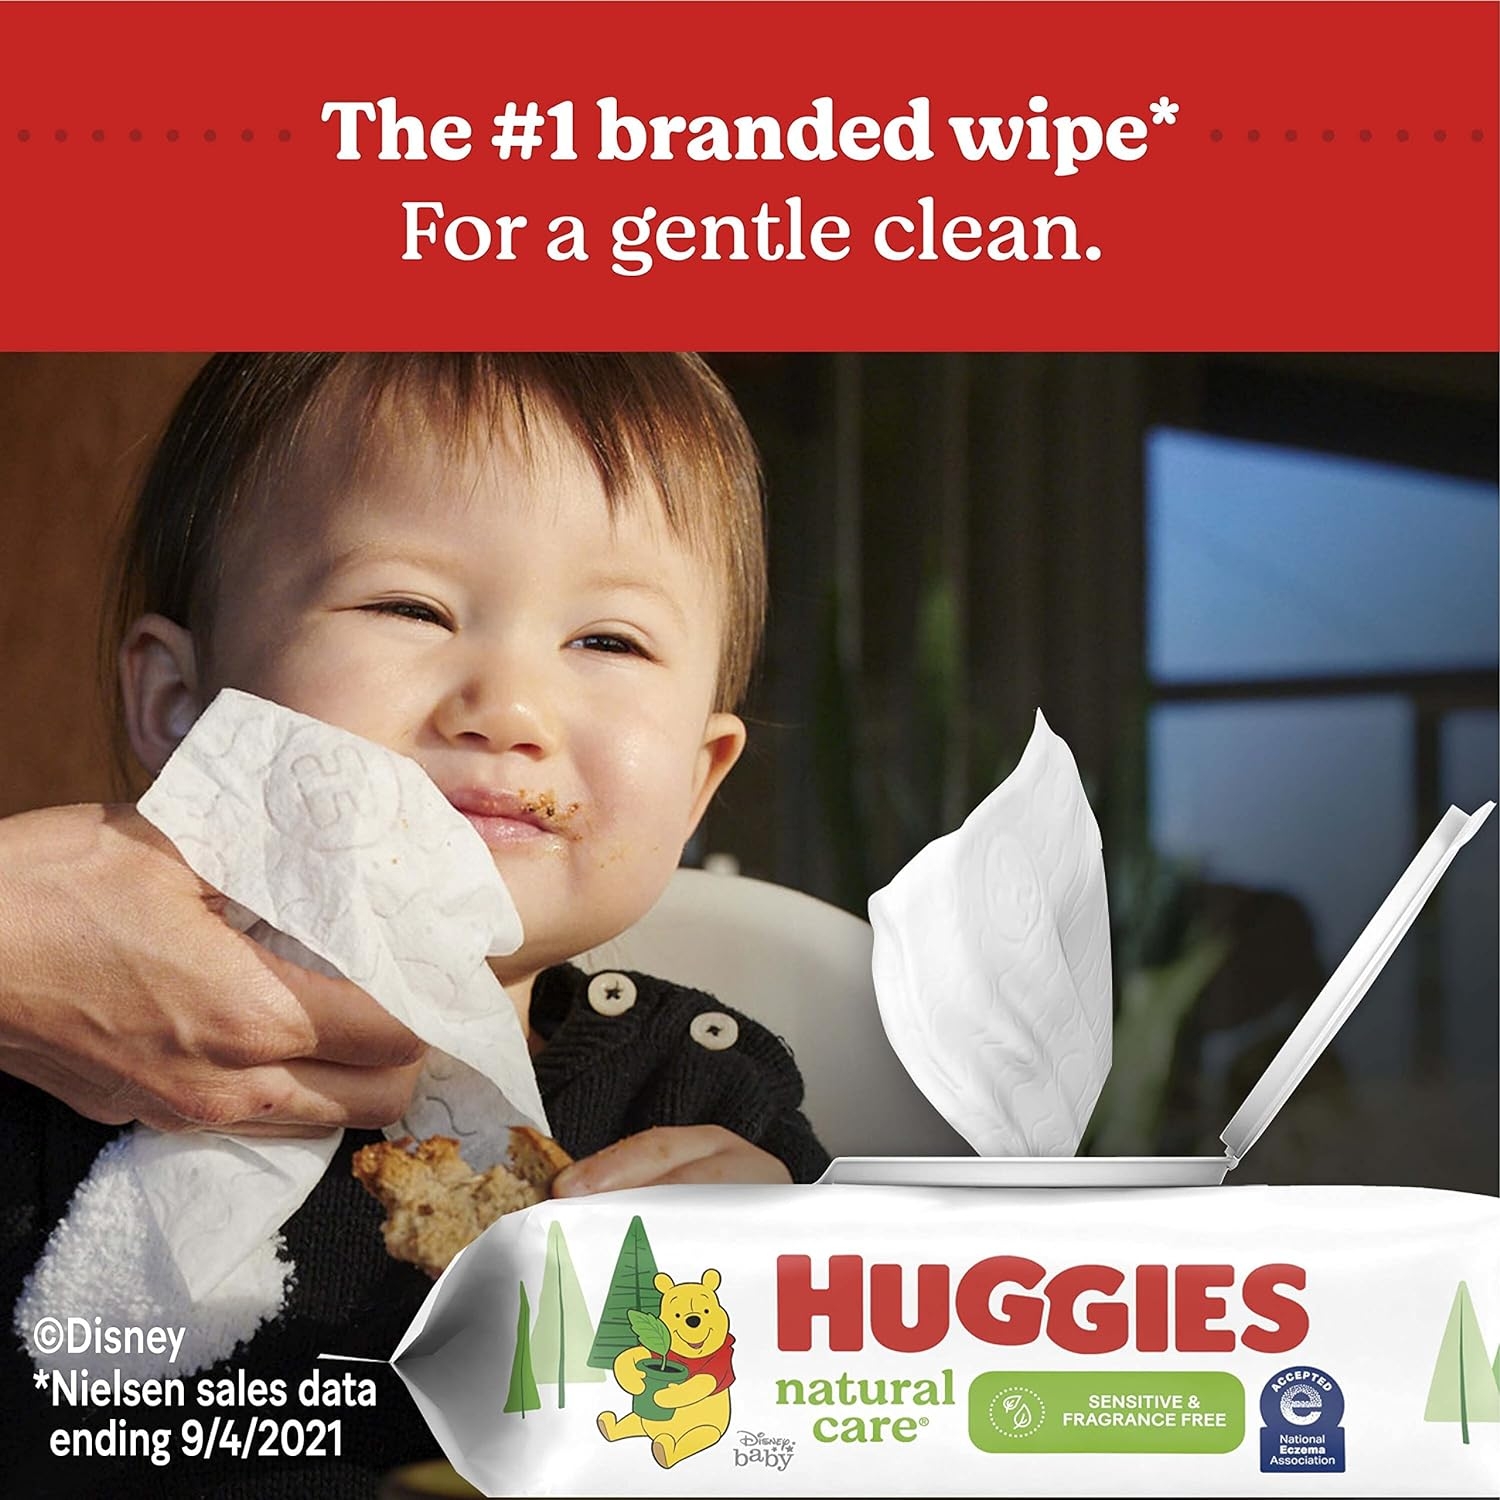 Baby Wipes, Huggies Natural Care Sensitive Baby Diaper Wipes, Unscented, Hypoallergenic, 8 Flip-Top Packs (448 Wipes Total)